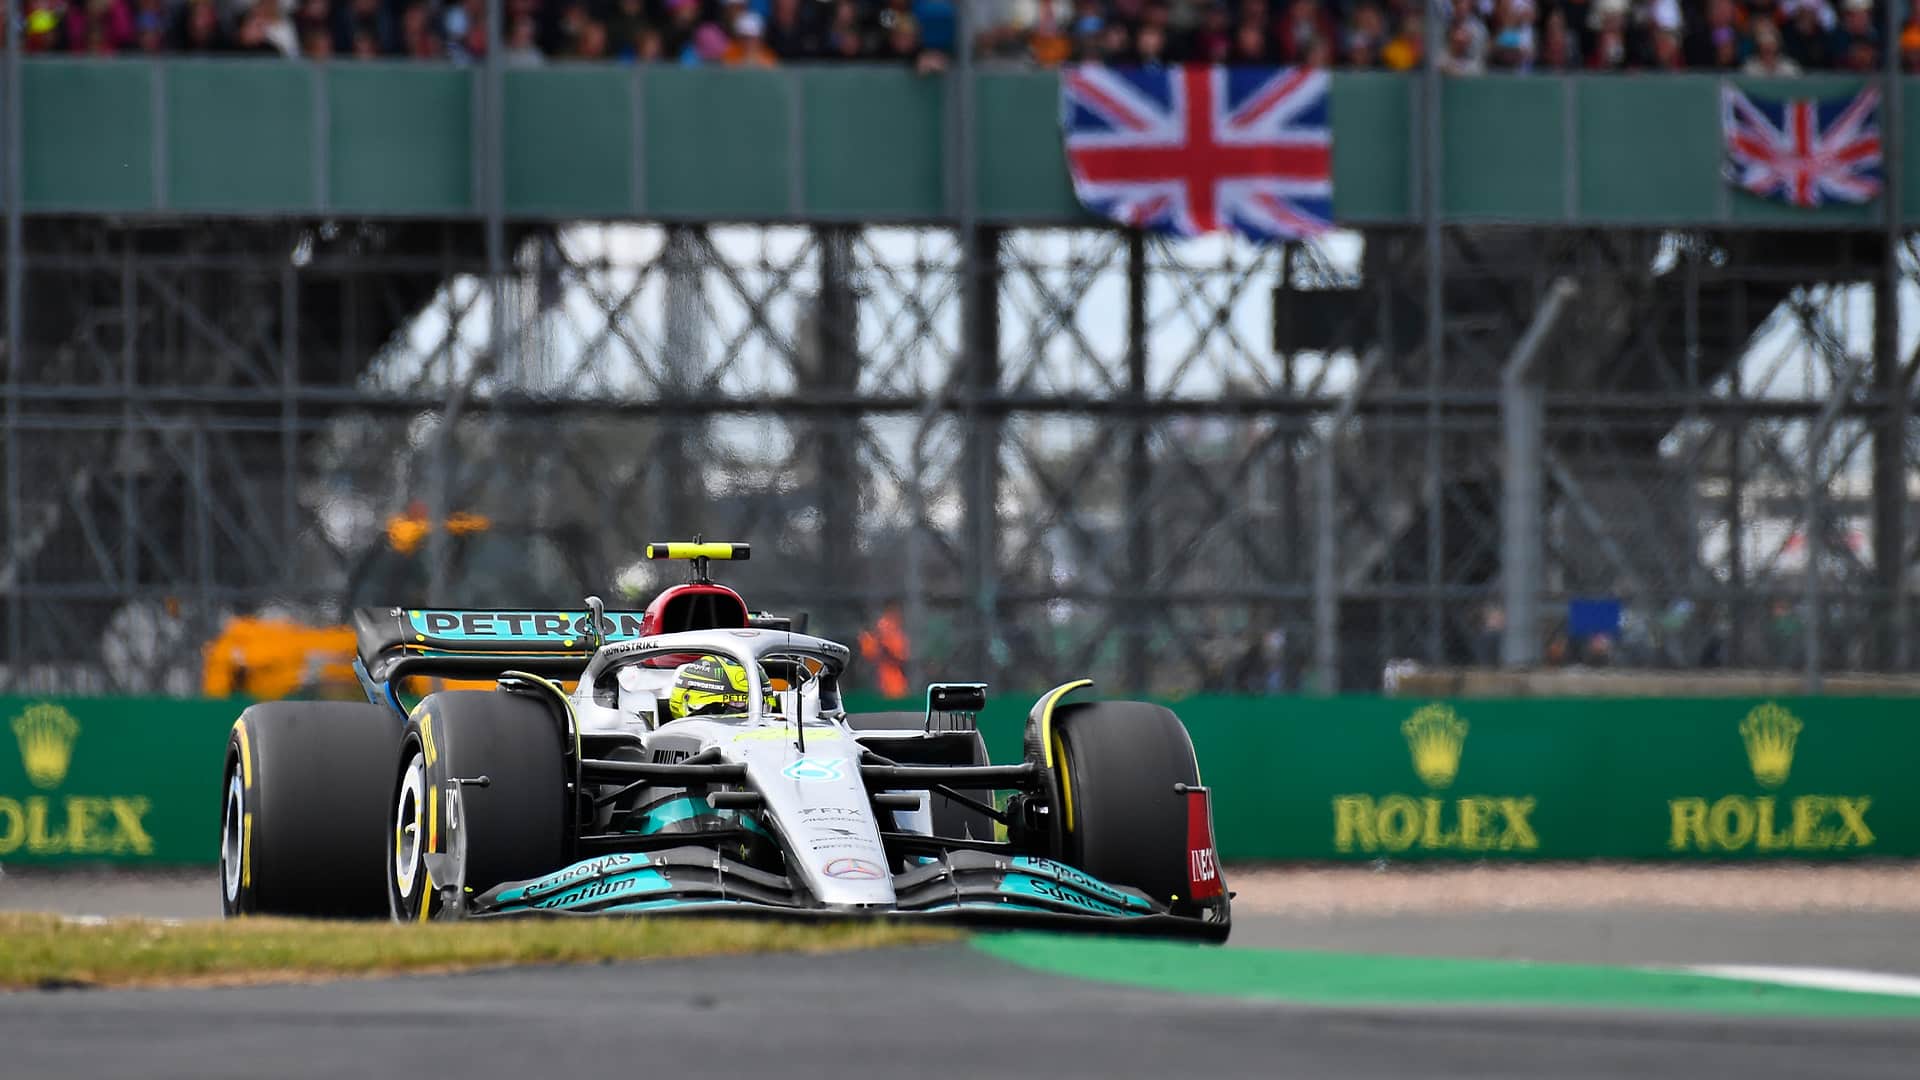 How to watch 2023 British GP F1 live stream, TV schedule and start time